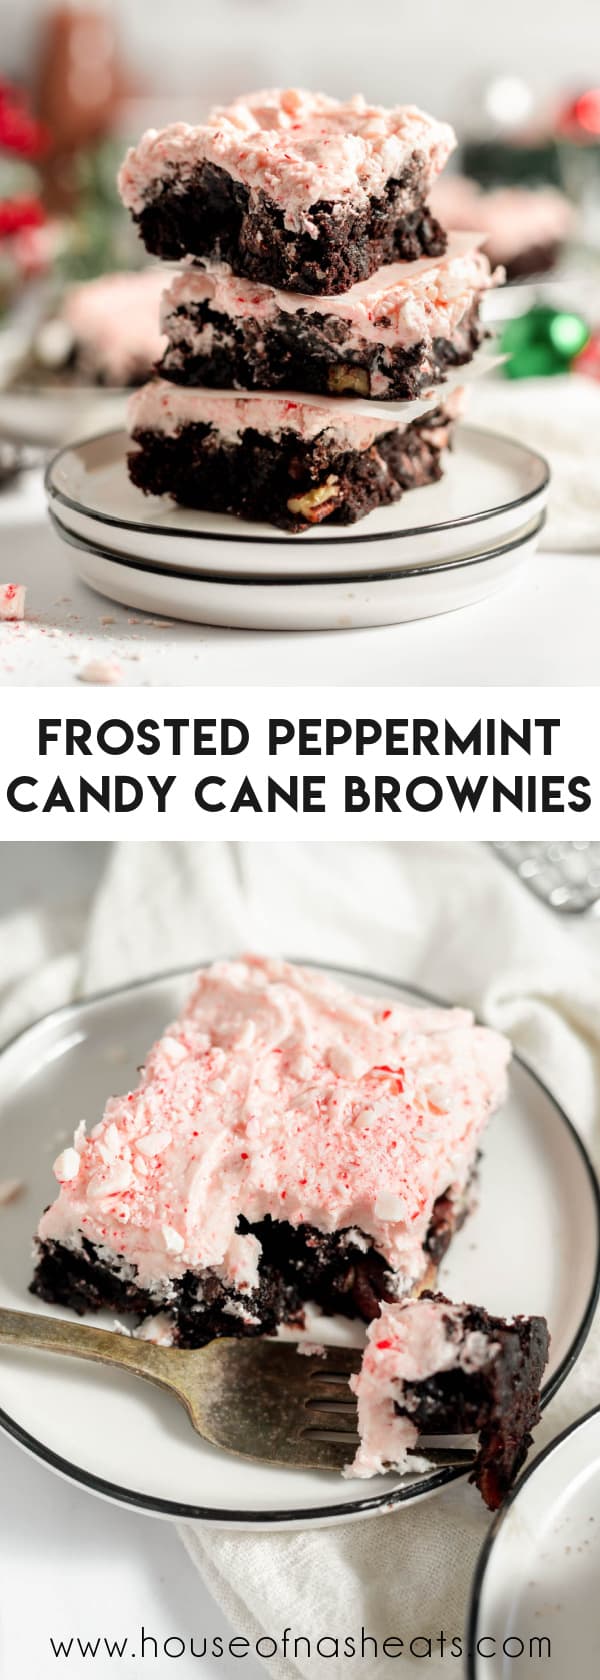 A collage of images of frosted peppermint candy cane brownies with text overlay.